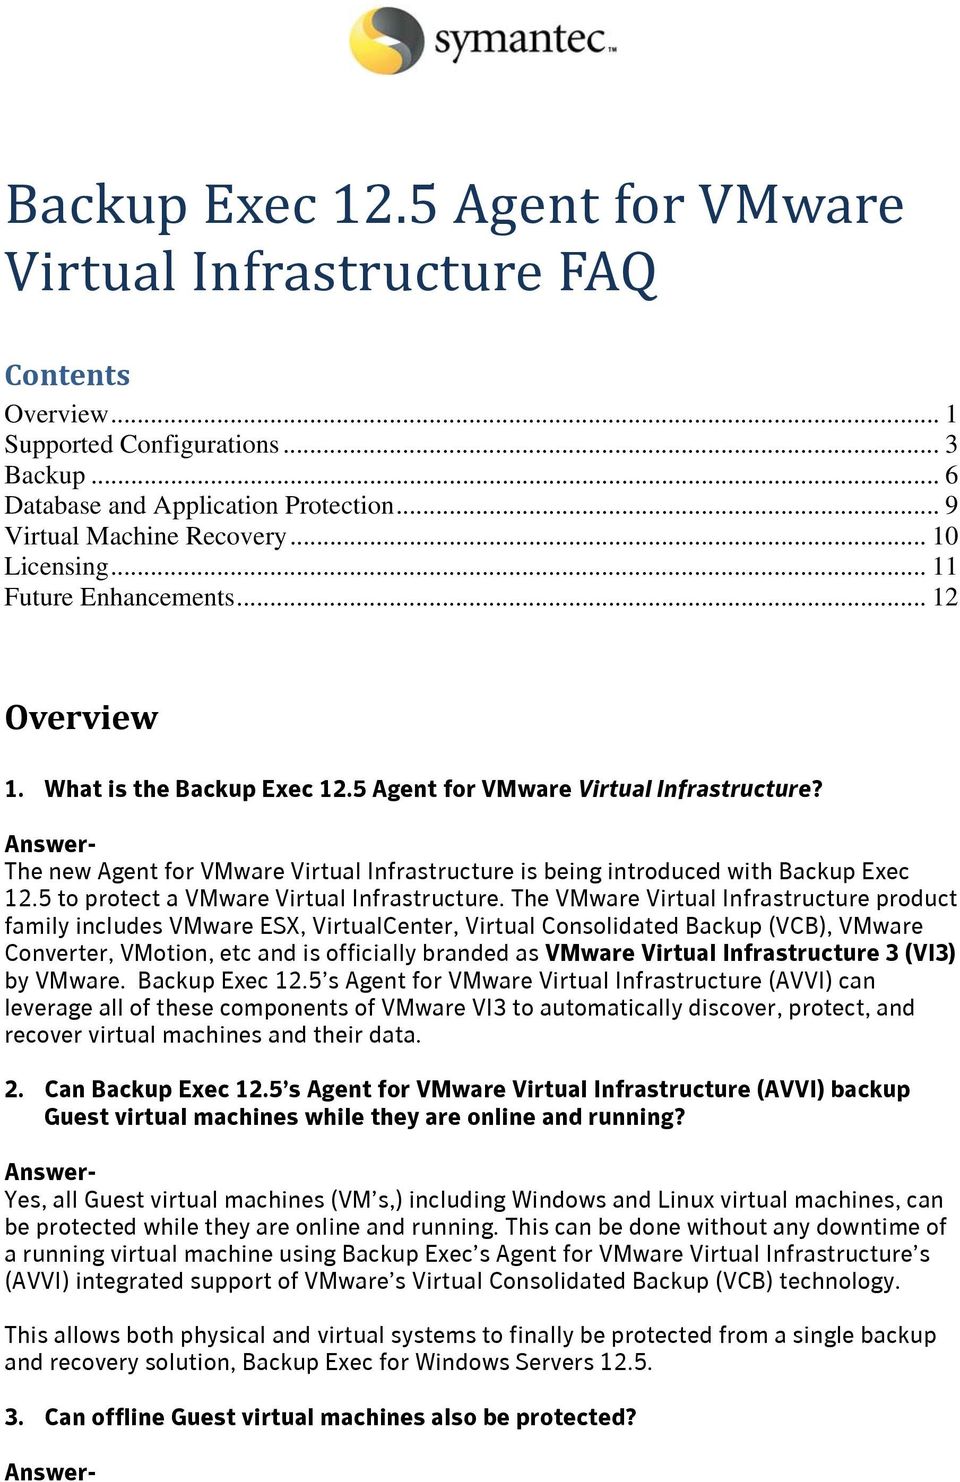 The new Agent for VMware Virtual Infrastructure is being introduced with Backup Exec 12.5 to protect a VMware Virtual Infrastructure.